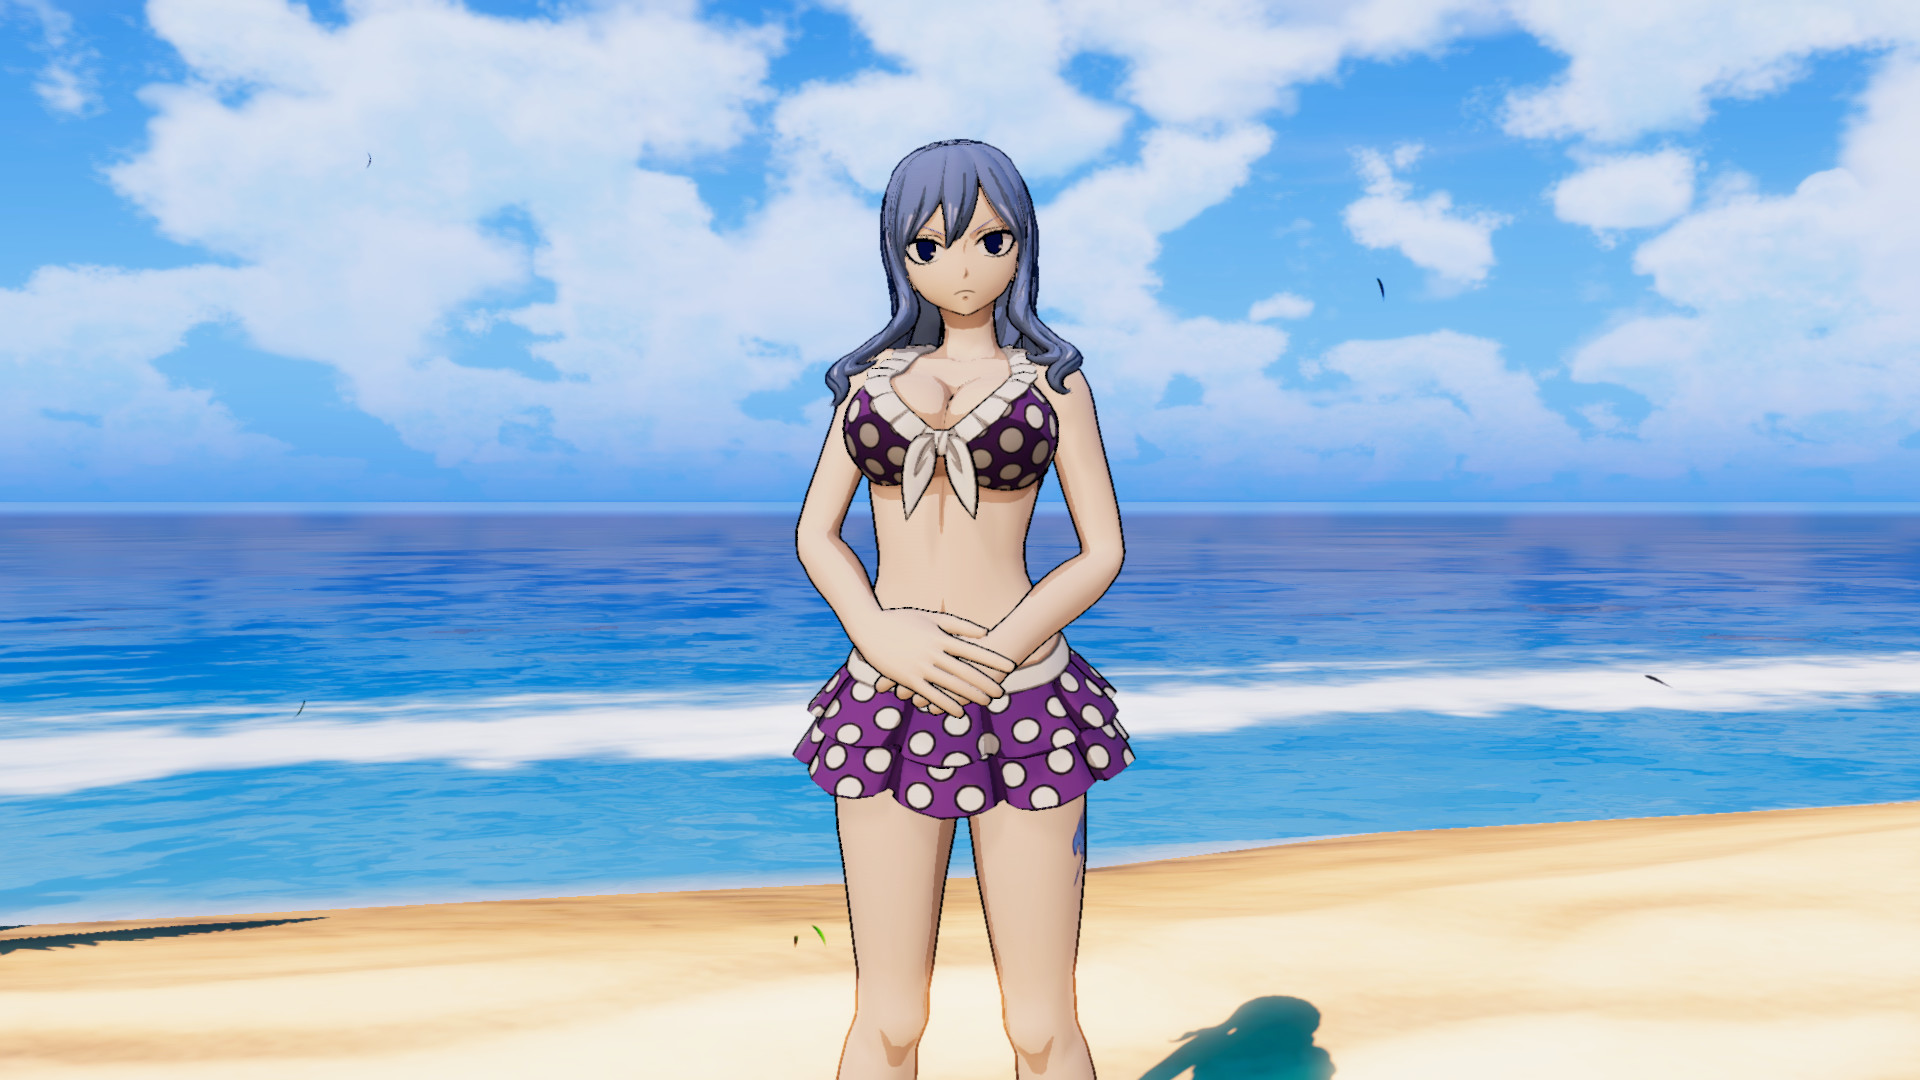 FAIRY TAIL: Juvia's Costume "Special Swimsuit" on Steam